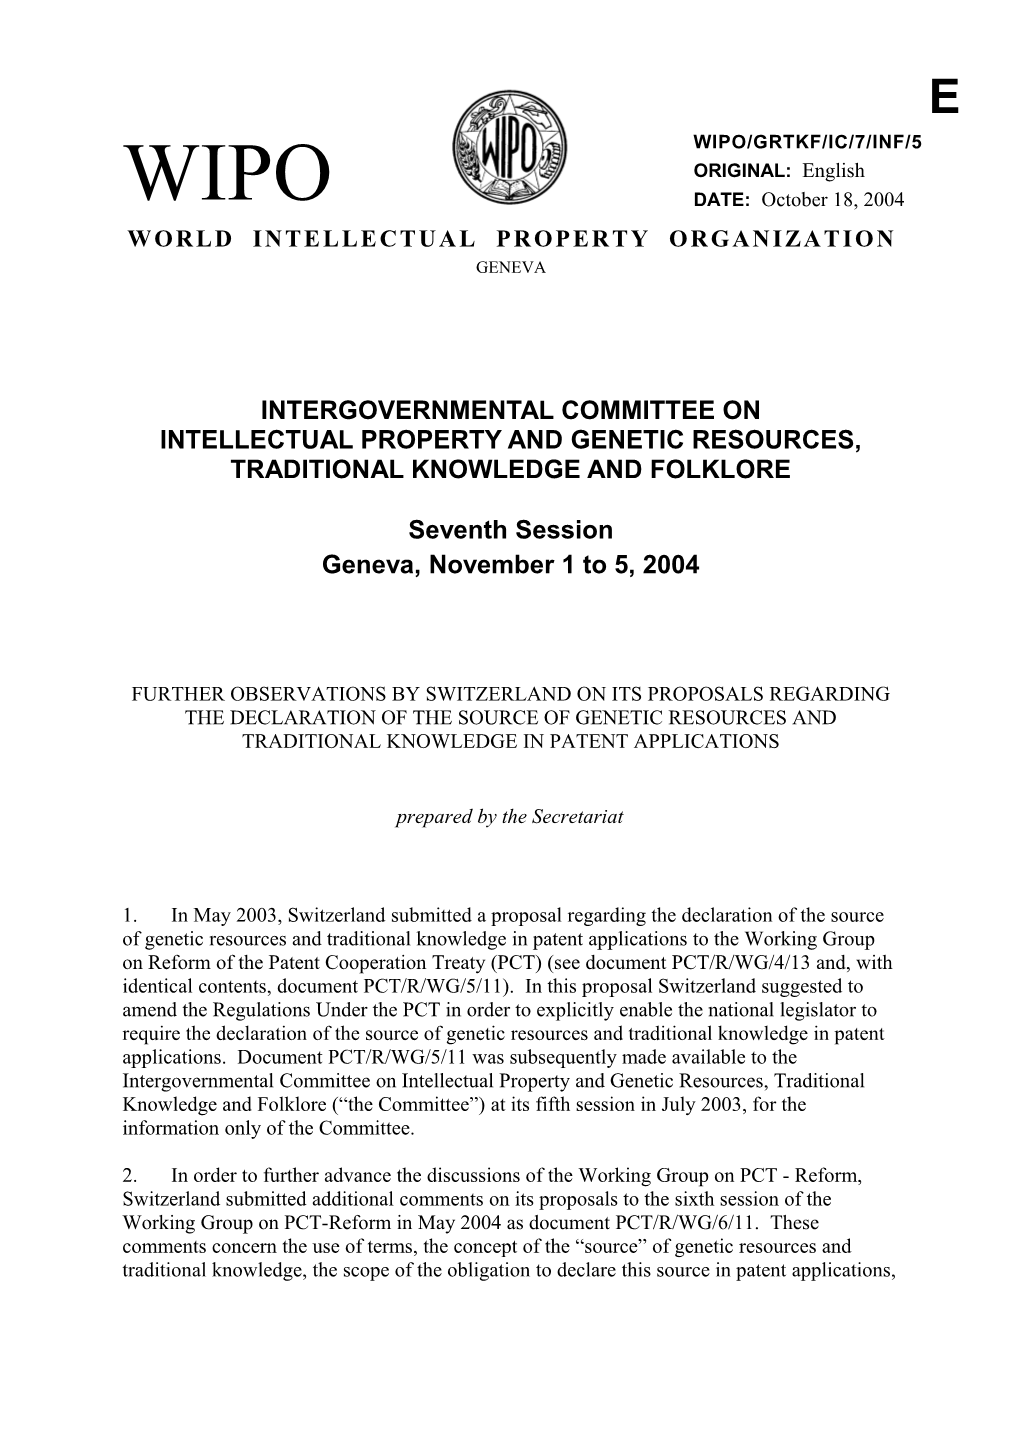 WIPO/GRTKF/IC/7/INF/5: Further Observations by Switzerland on Its Proposals Regarding The